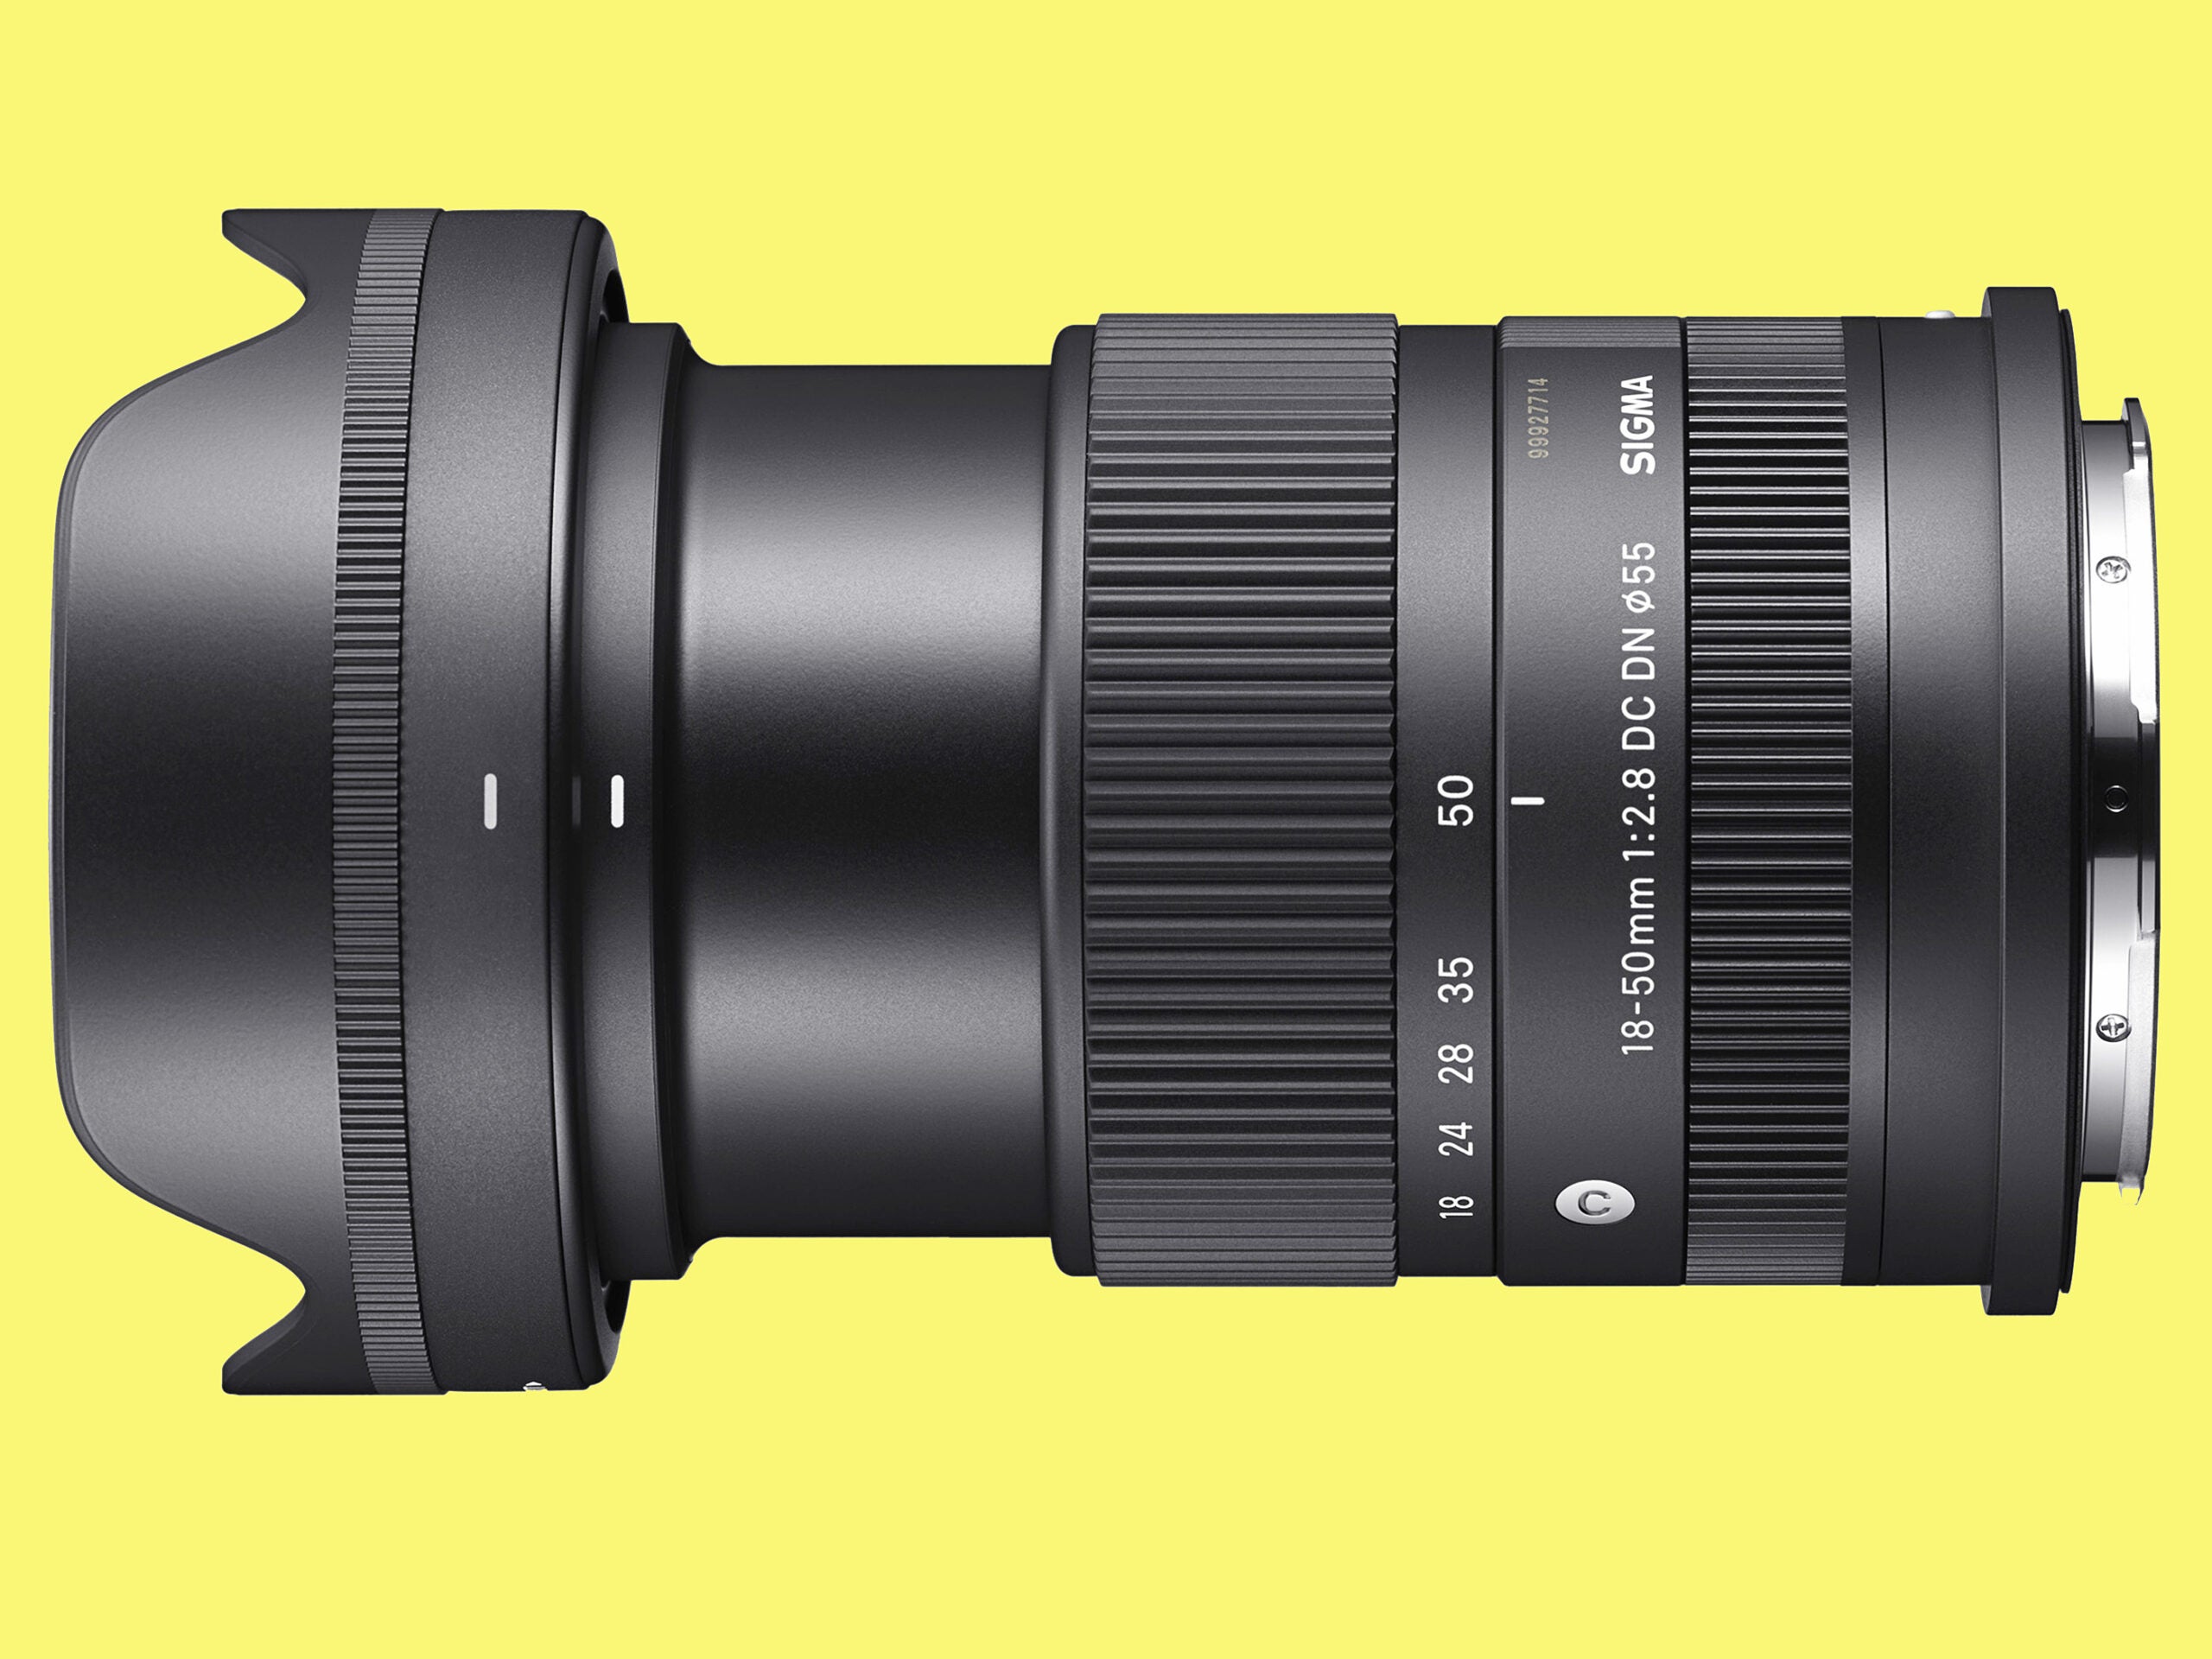 Meet the new Sigma 18-50mm f/2.8 DC DN Contemporary lens for Sony E-mount and Leica/Panasonic/Sigma L-mount APS-C mirrorless cameras